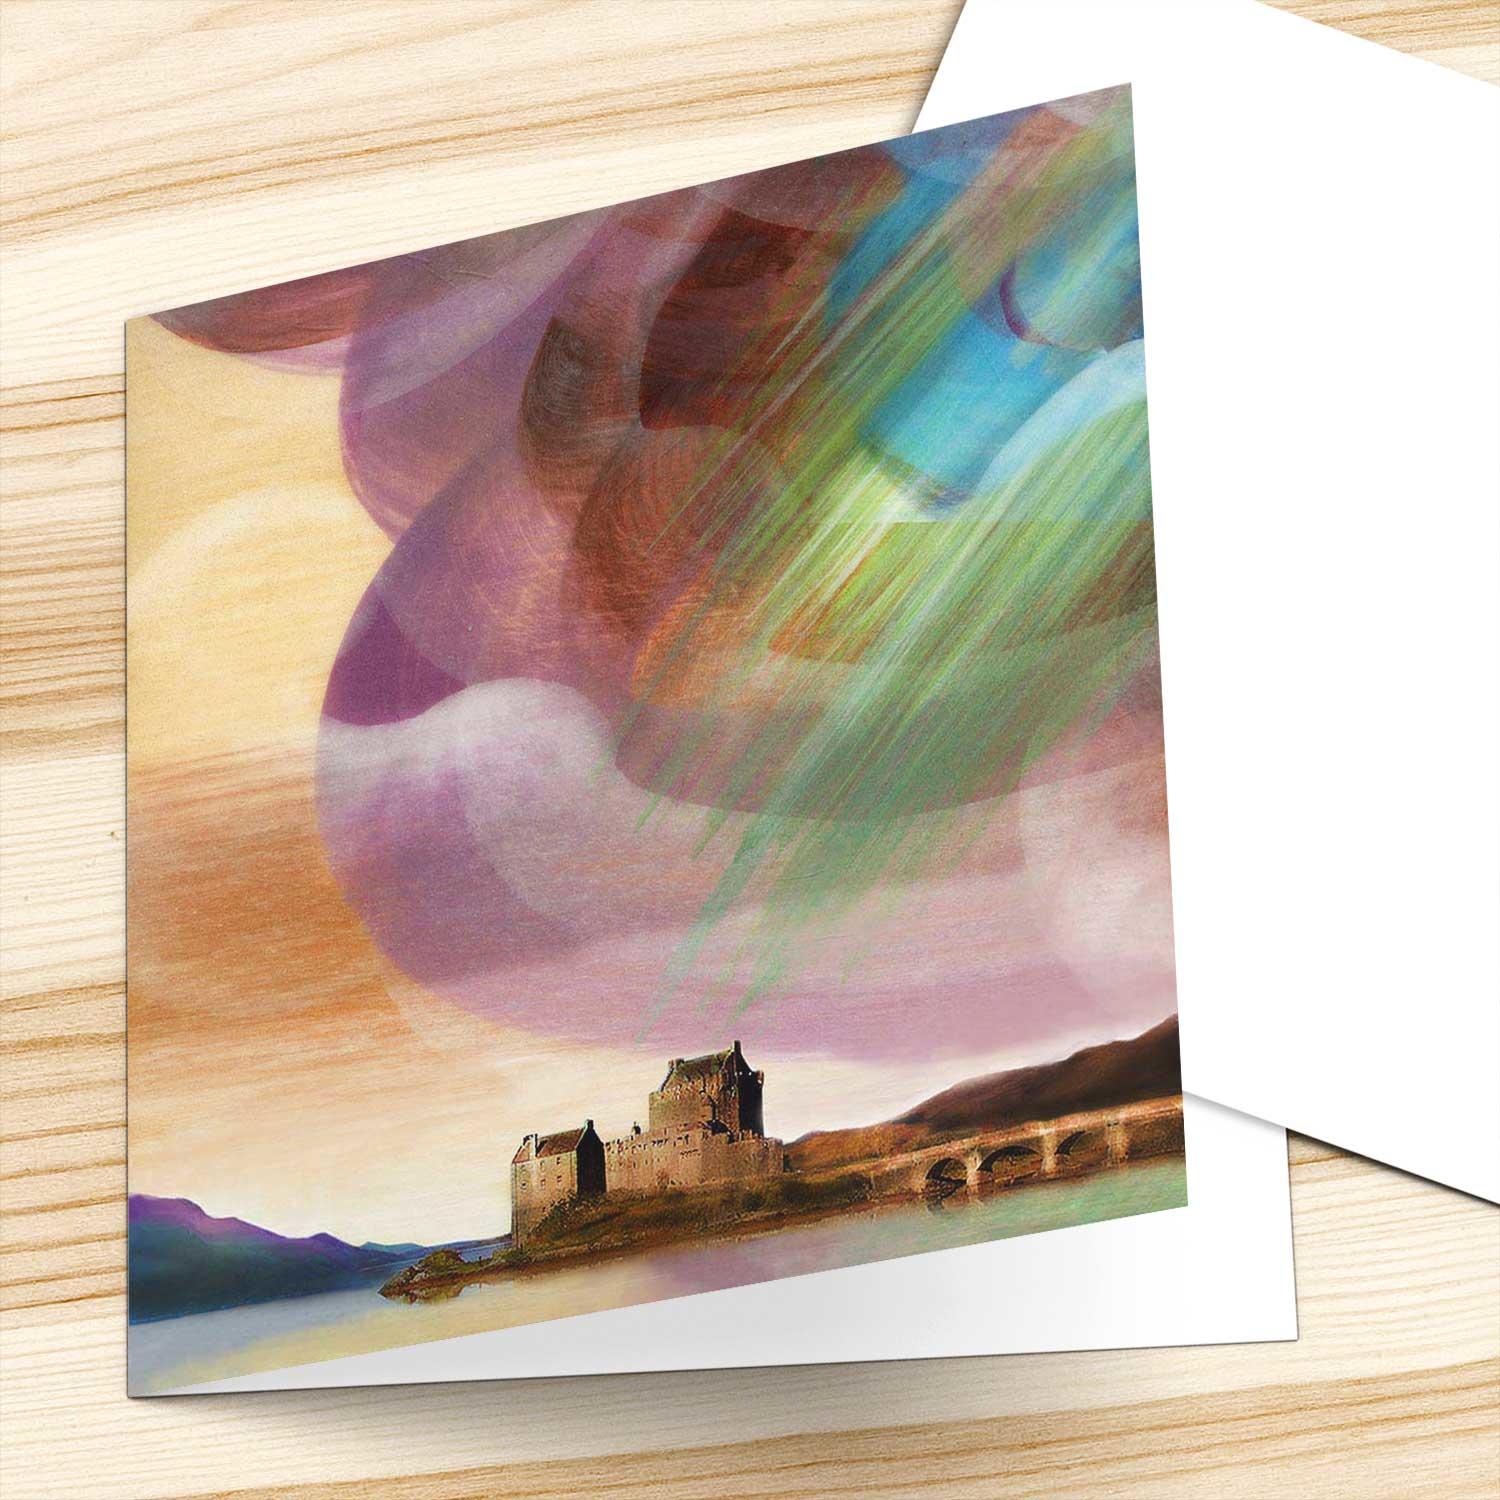 Eilean Donan Castle Greeting Card from an original painting by artist Esther Cohen